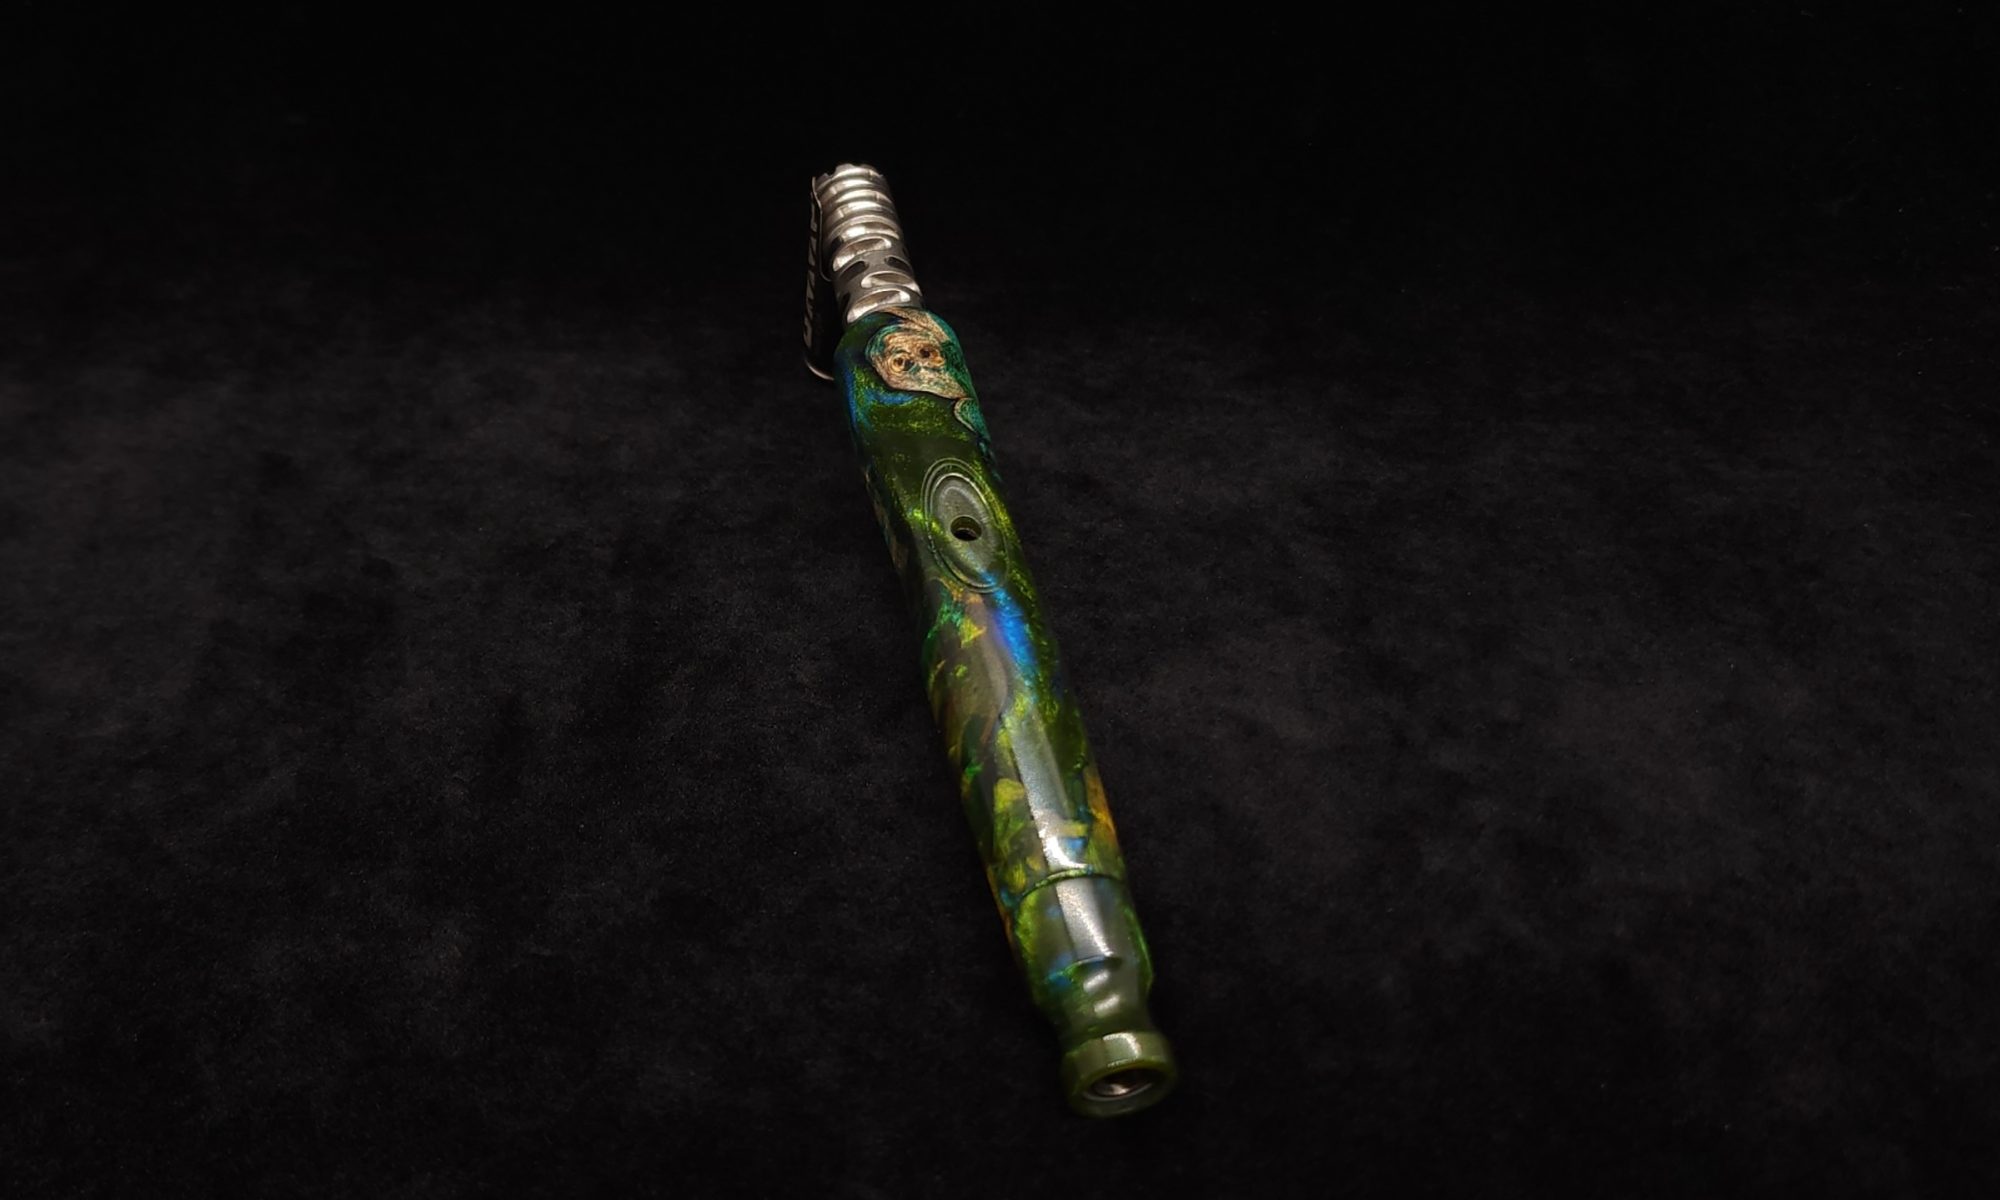 This image portrays Straight Tapered Dynavap XL Burl Hybrid Stem + Matching Mouthpiece by Dovetail Woodwork.